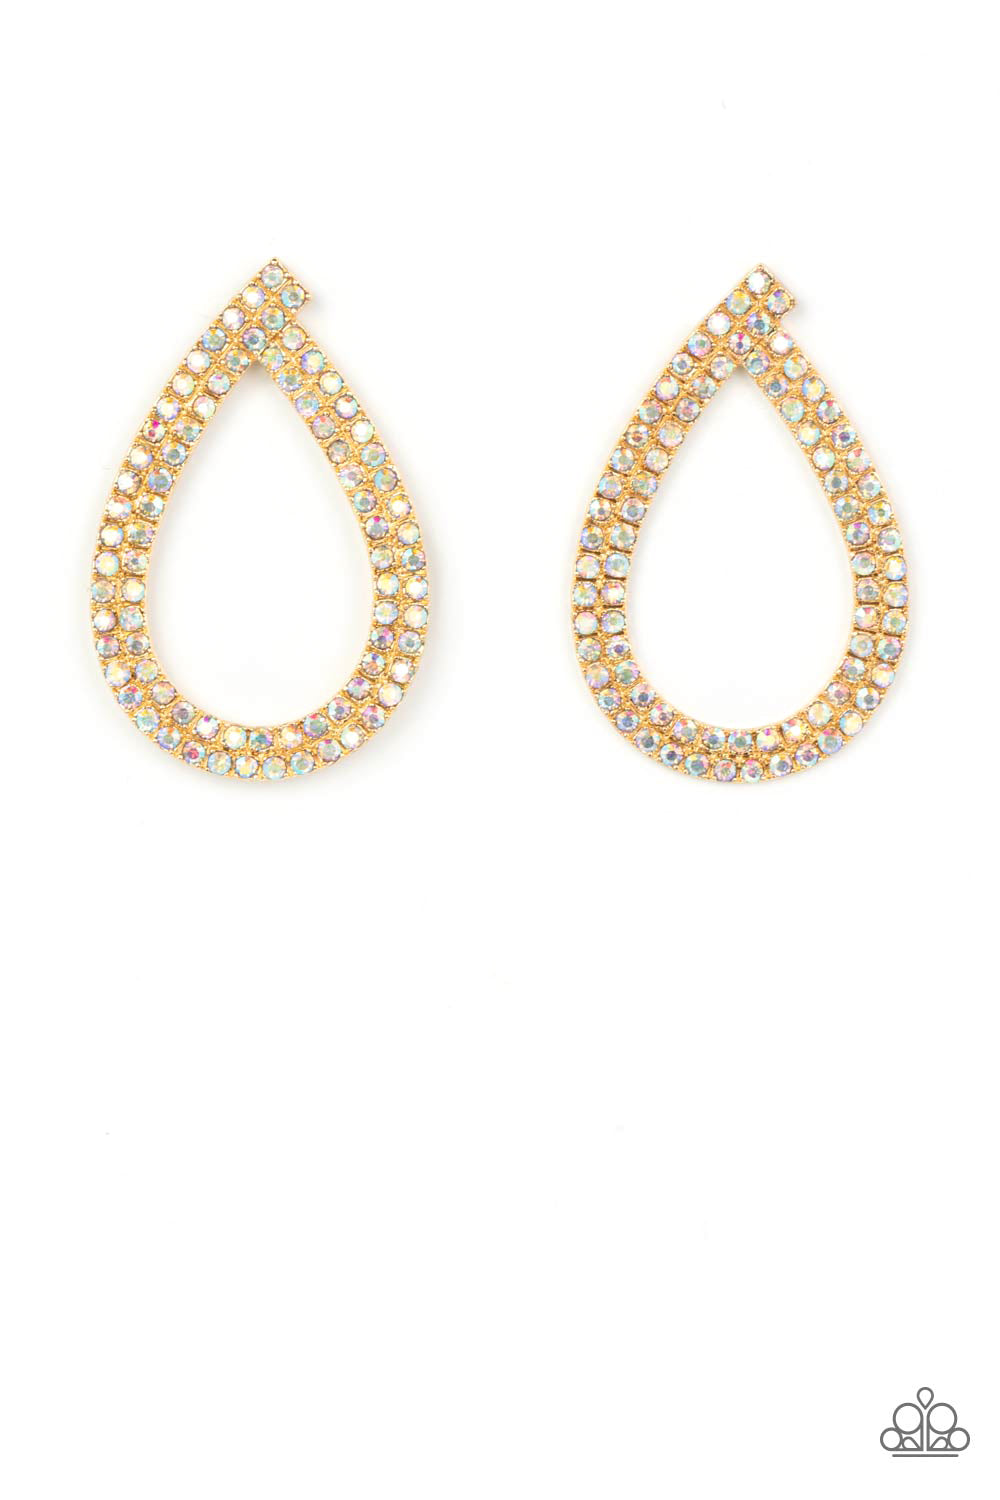 Diva Dust Gold Earring - Paparazzi Accessories  Glitzy ribbons of dainty iridescent rhinestones delicately swoop into a stellar teardrop frame, resulting in a sultry sparkle. Due to its prismatic palette, color may vary. Earring attaches to a standard post fitting.  Sold as one pair of post earrings.